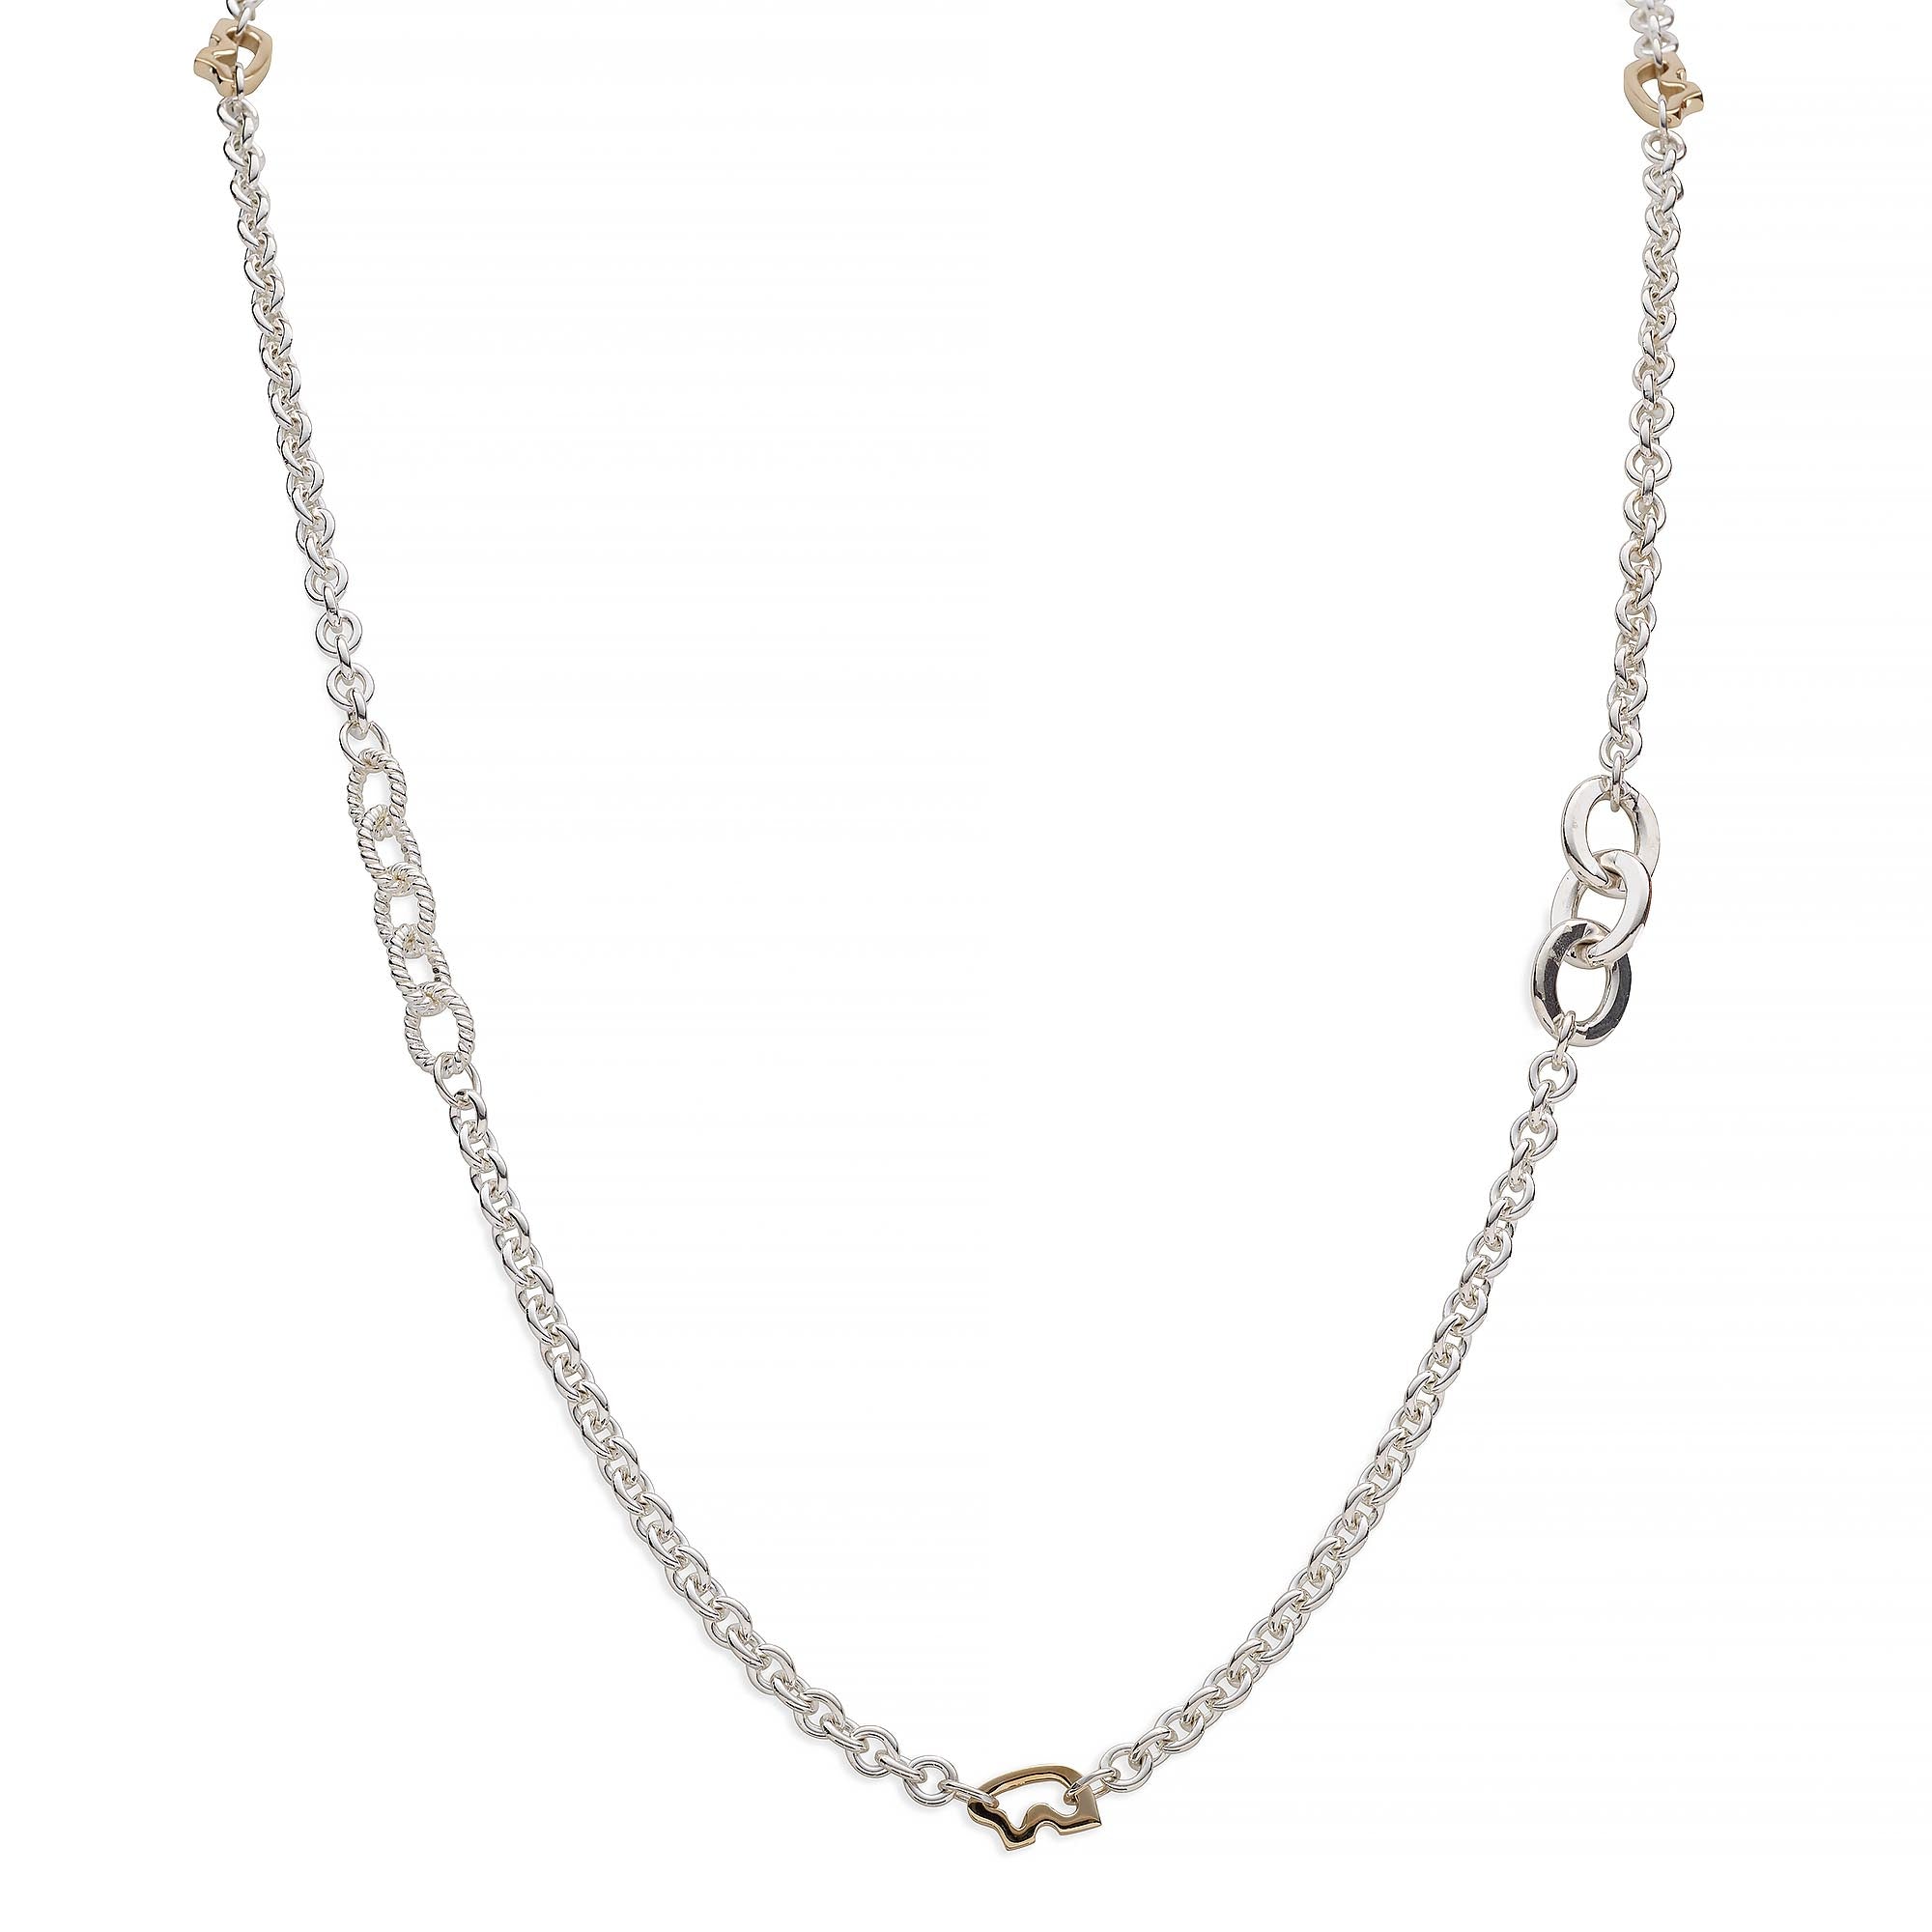 MIXD CHAIN NECKLACE